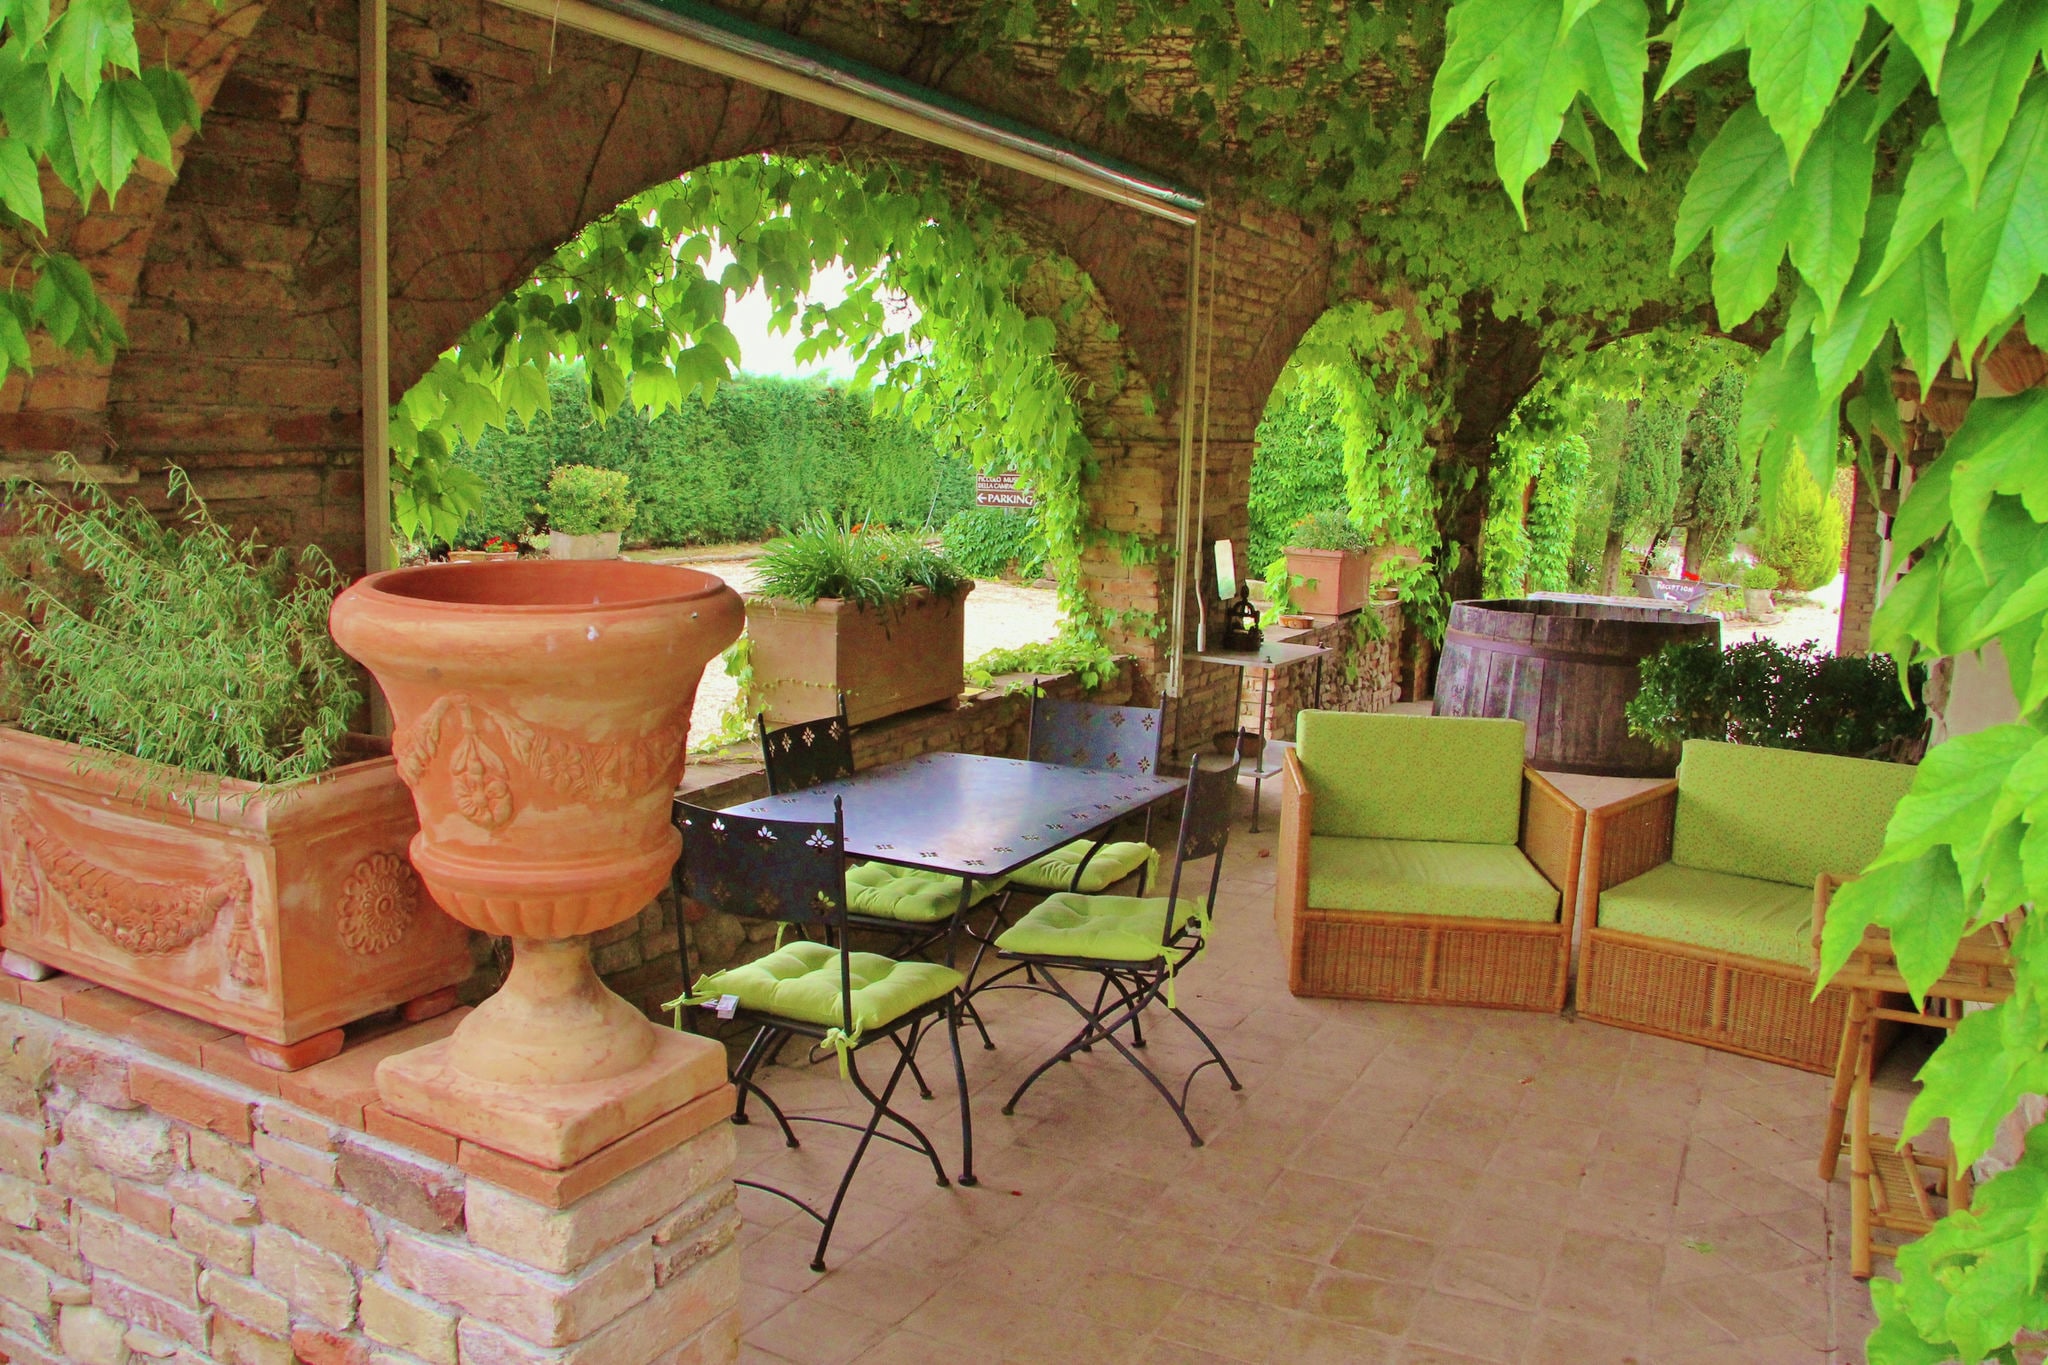 Agriturismo with pool, between vineyards, olive groves